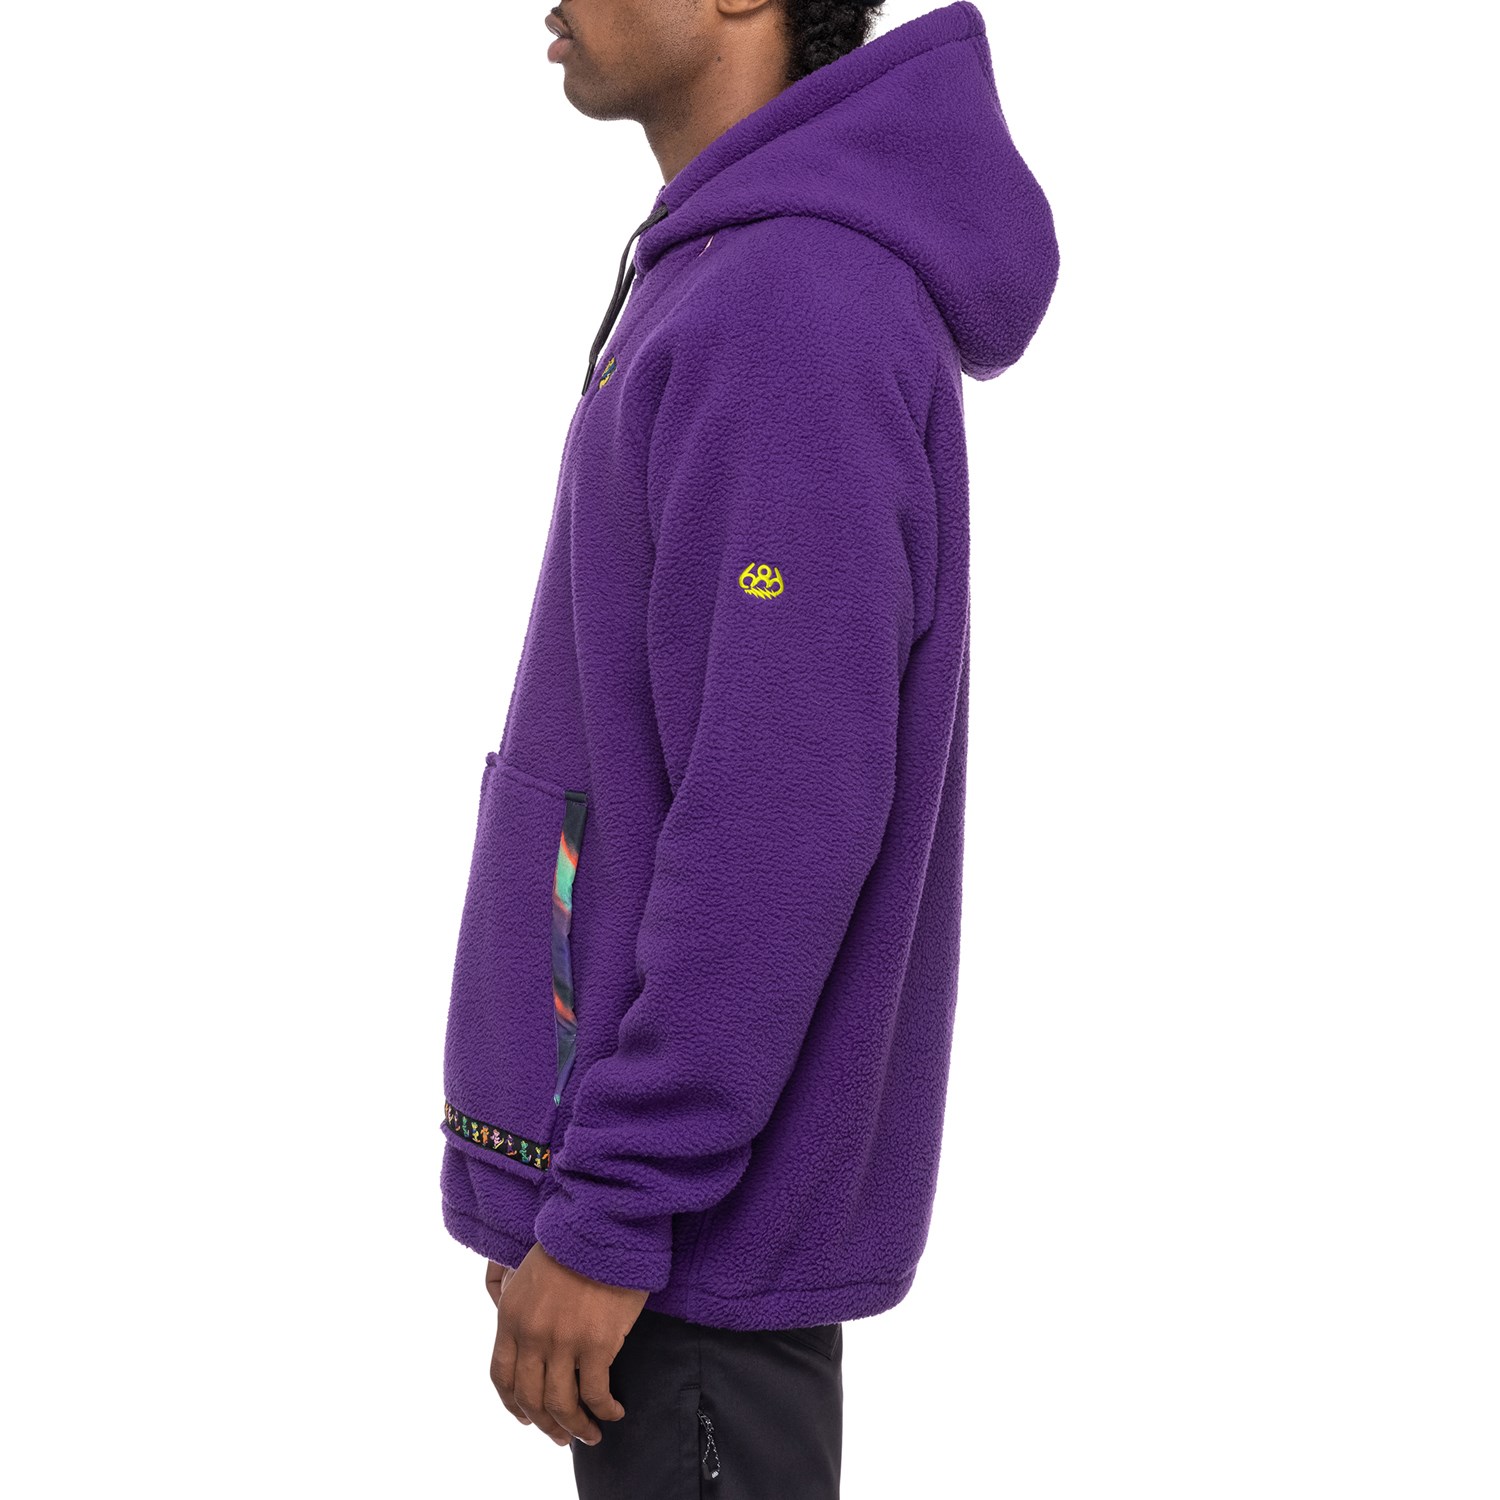 Muttonhead - Sherpa Fleece: The Periwinkle Hoodie and